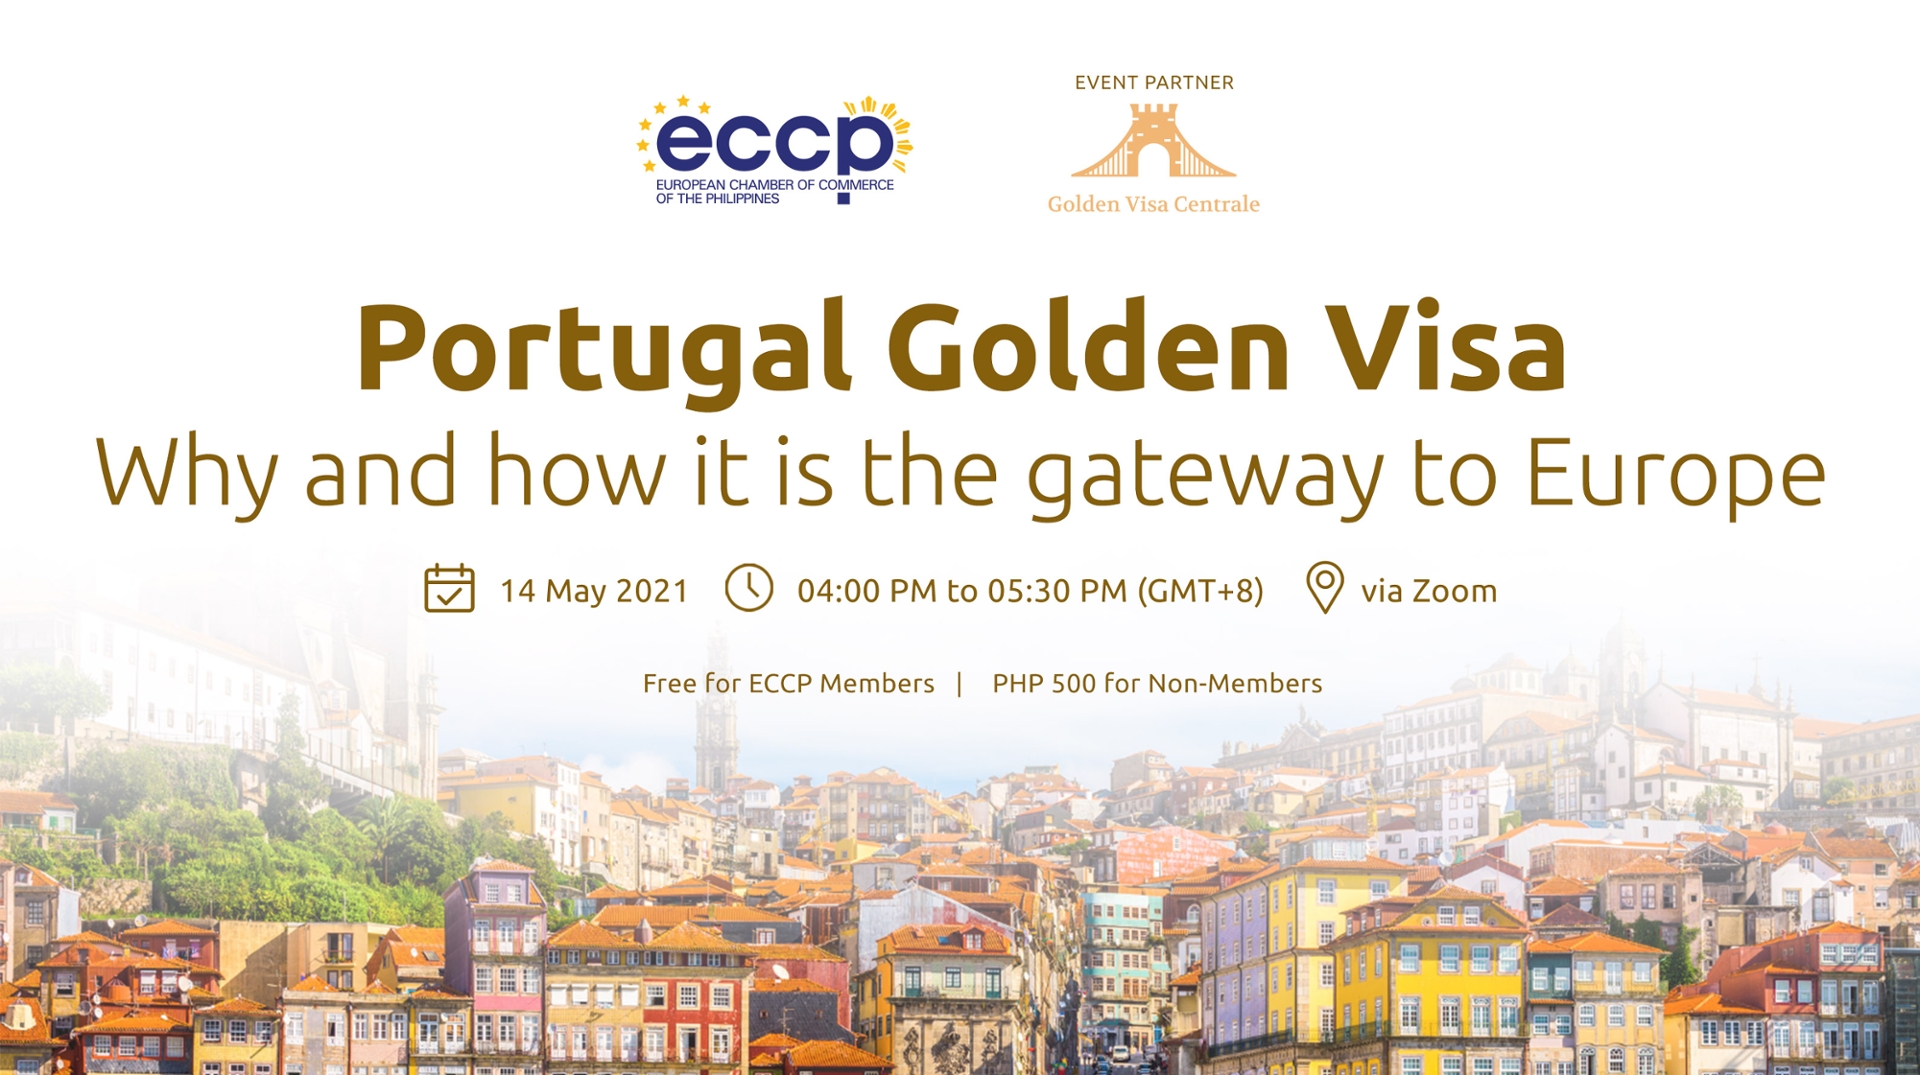 Portugal Golden Visa Why and how it is the gateway to Europe